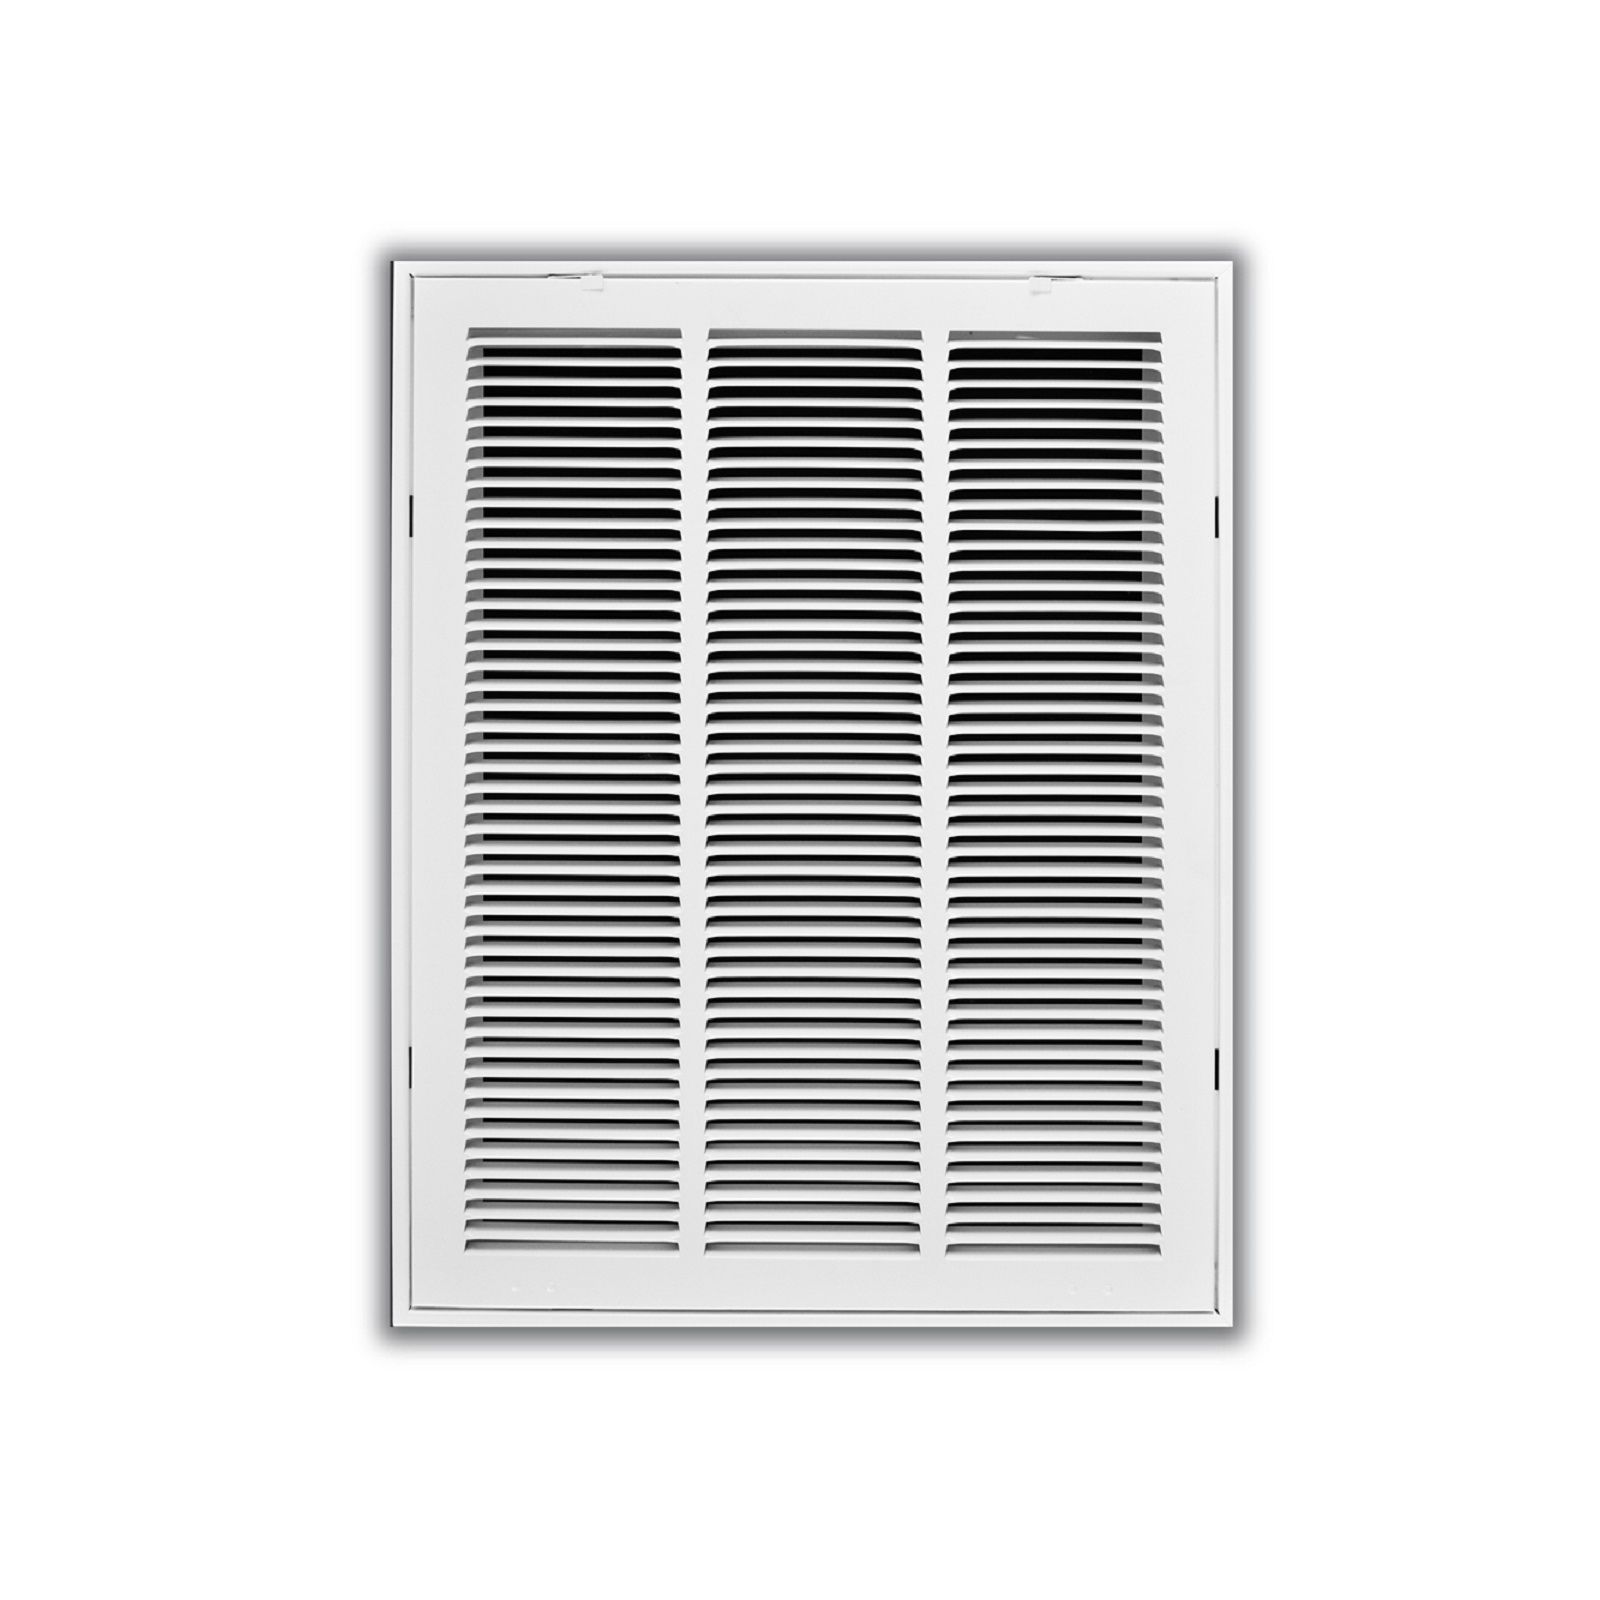 TRUaire 190 30X10 - Steel Return Air Filter Grille With Fixed Hinged Face, White, 30" X 10"